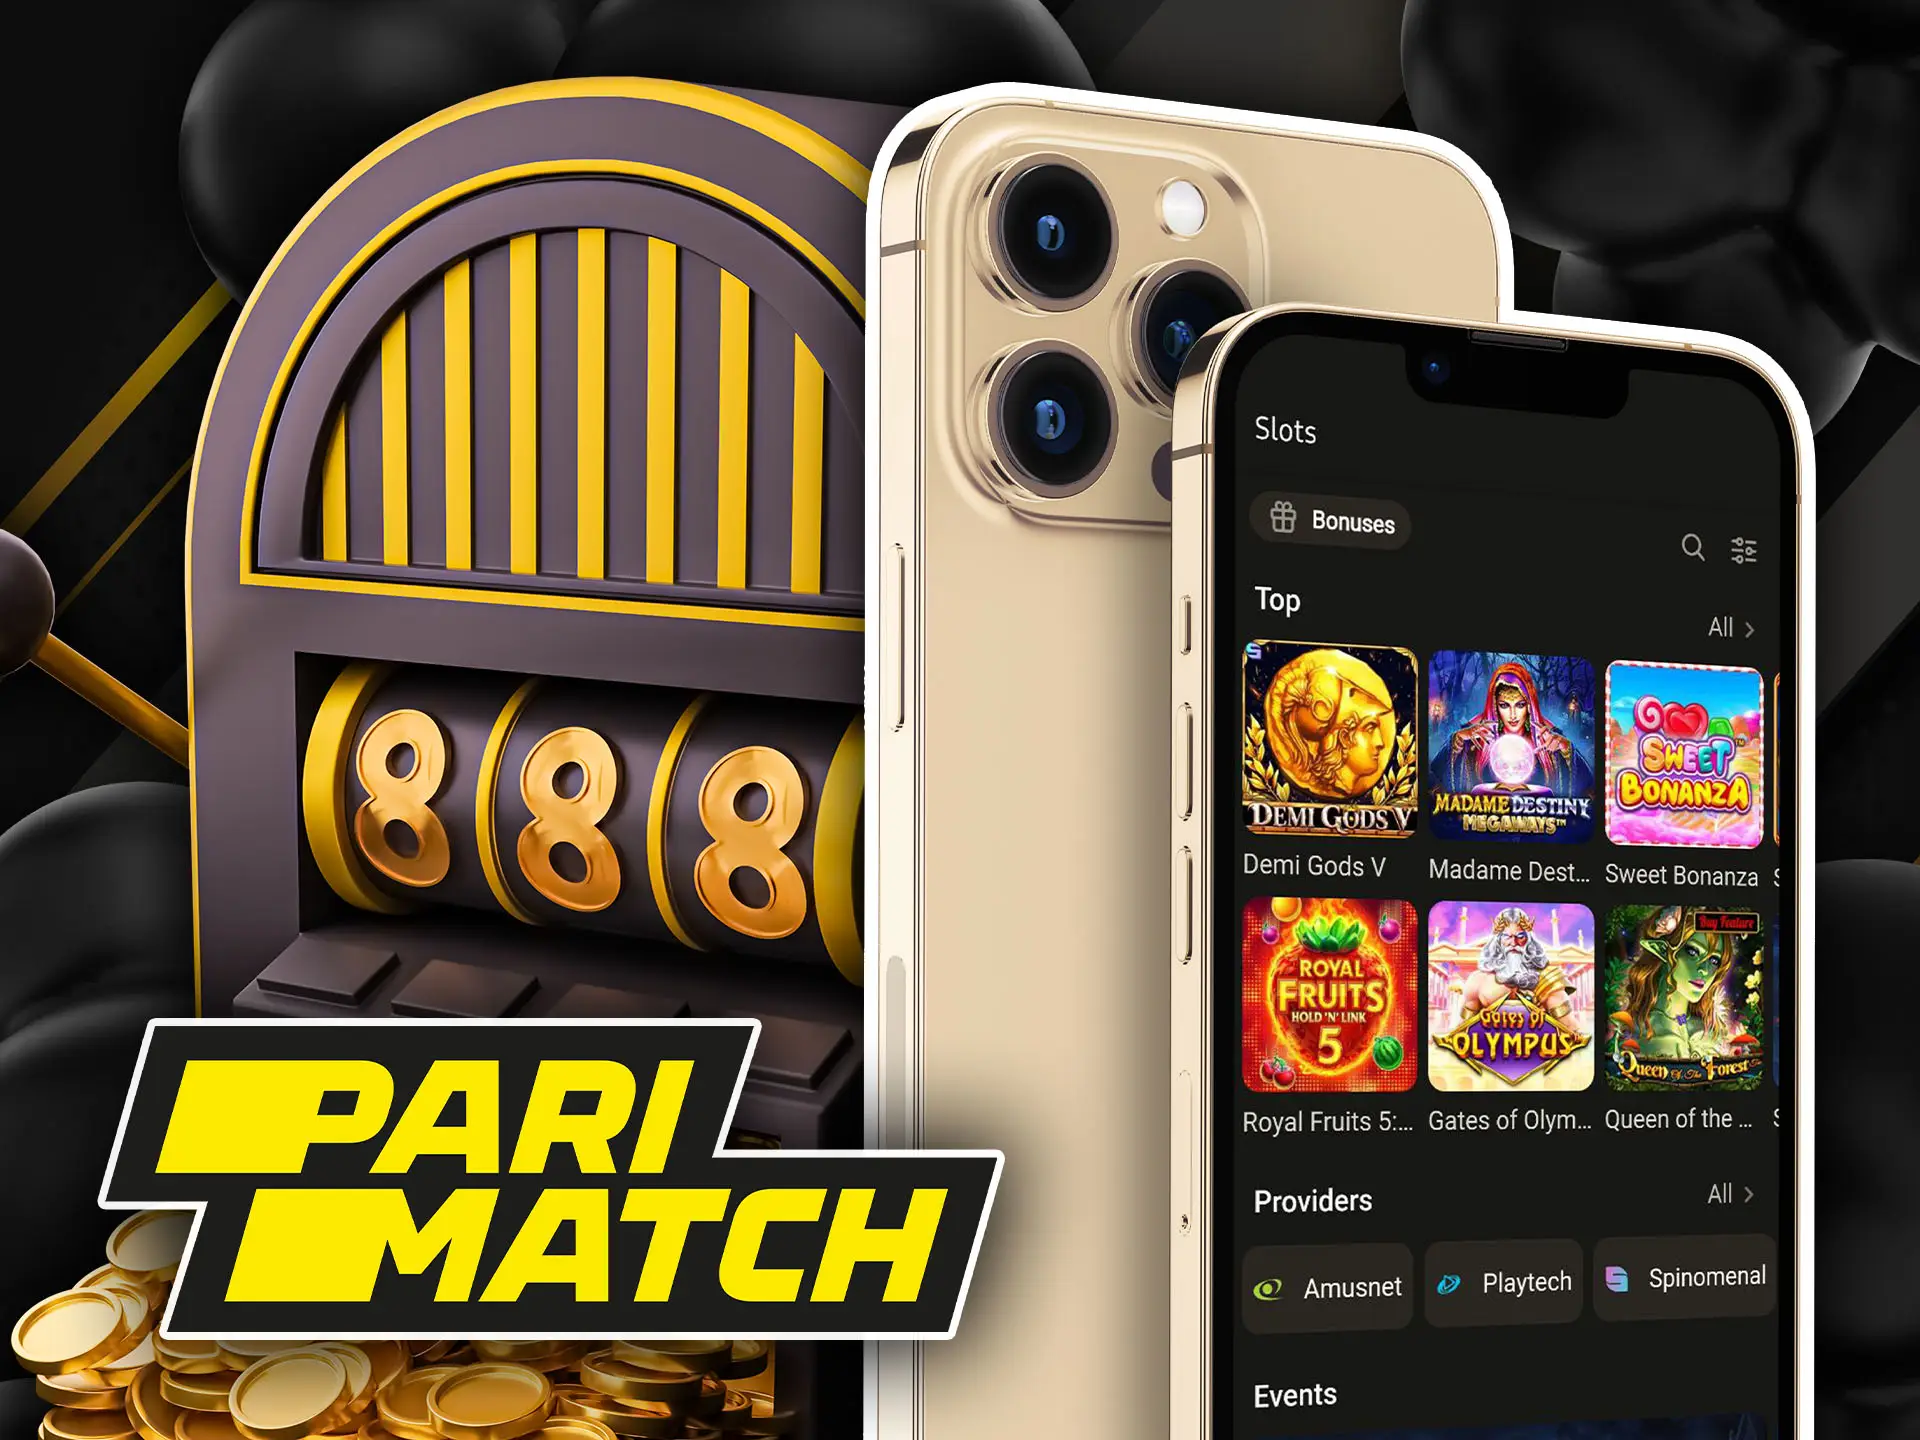 Slot games in the Parimatch app for India.